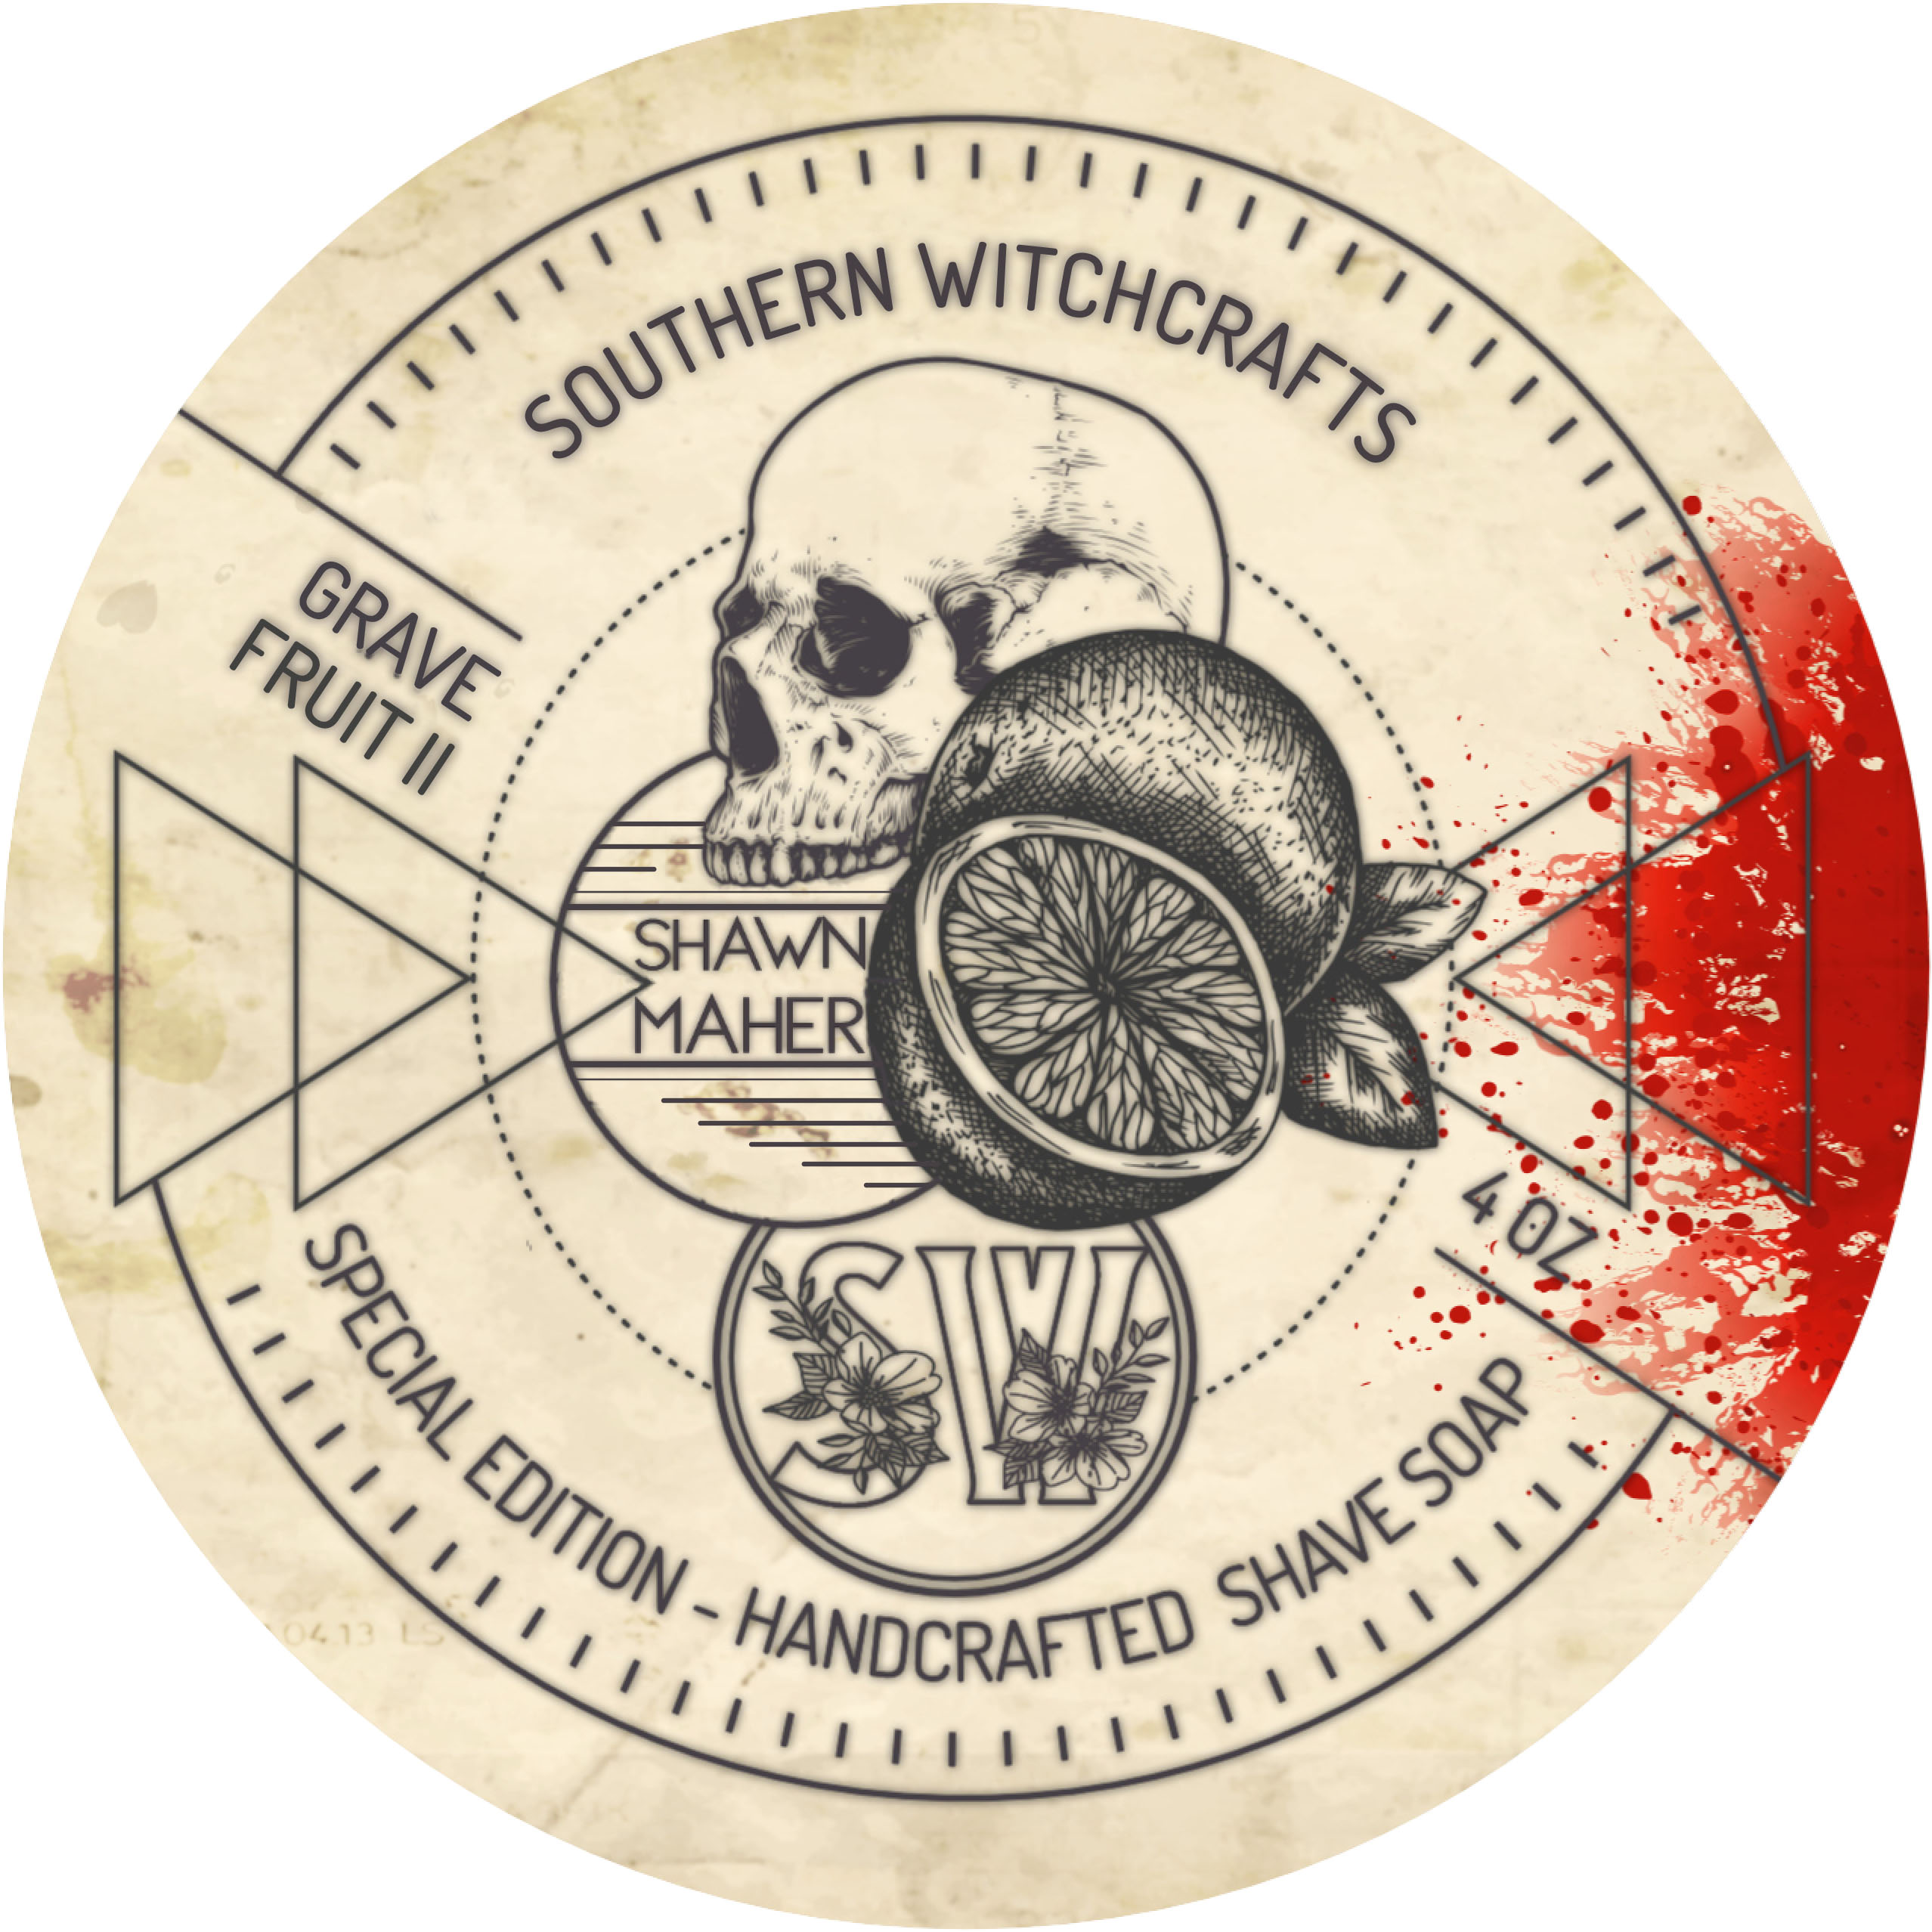 southernwitchcrafts.com